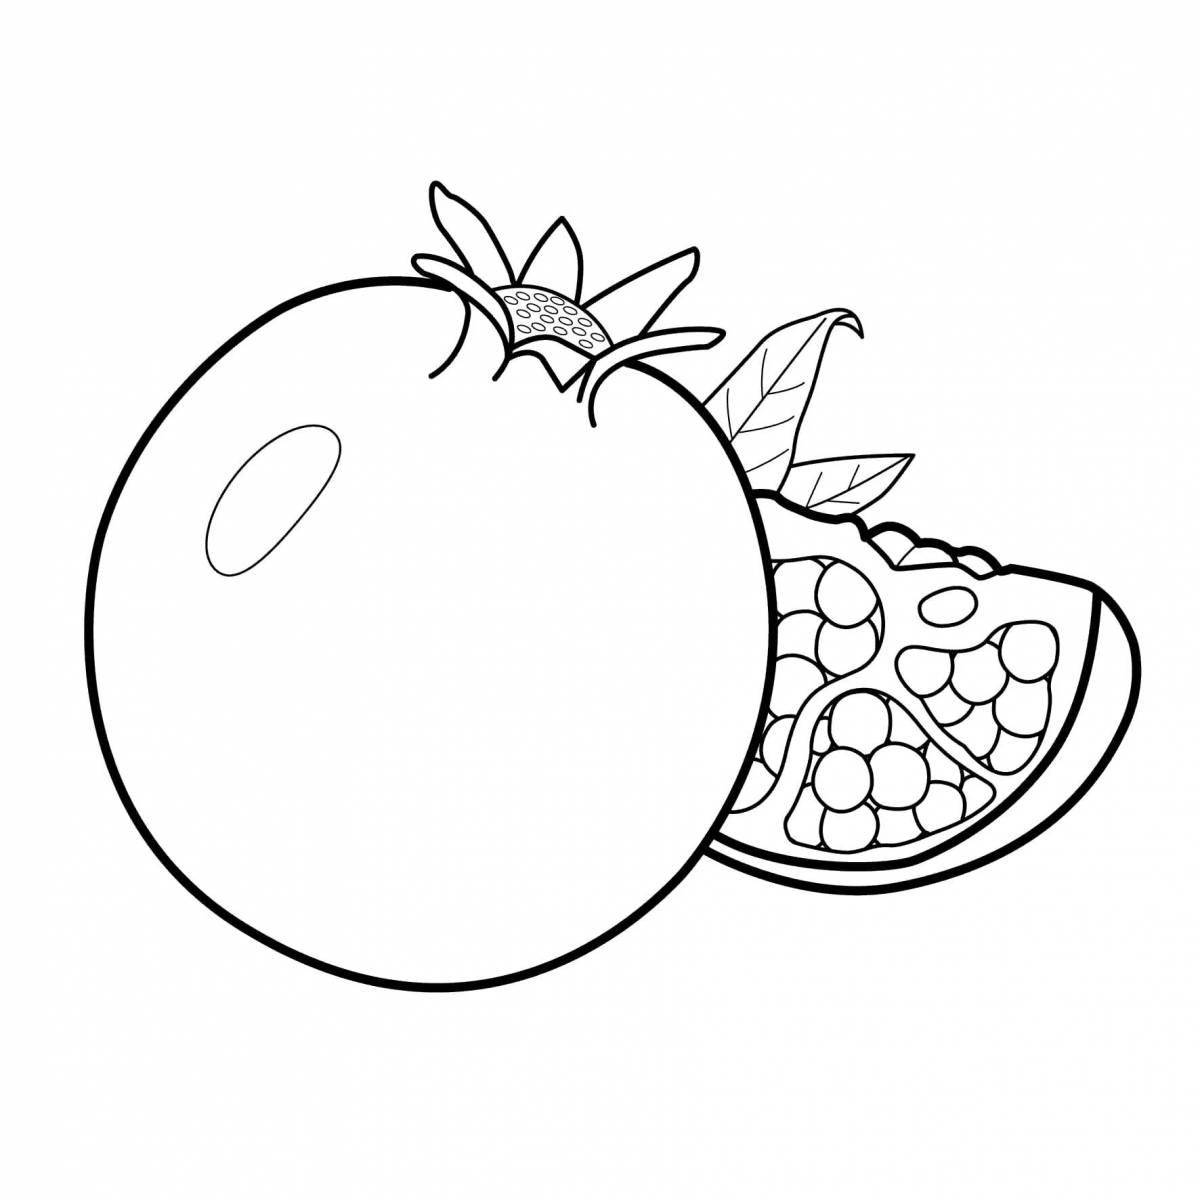 Glowing pomegranate coloring book for kids